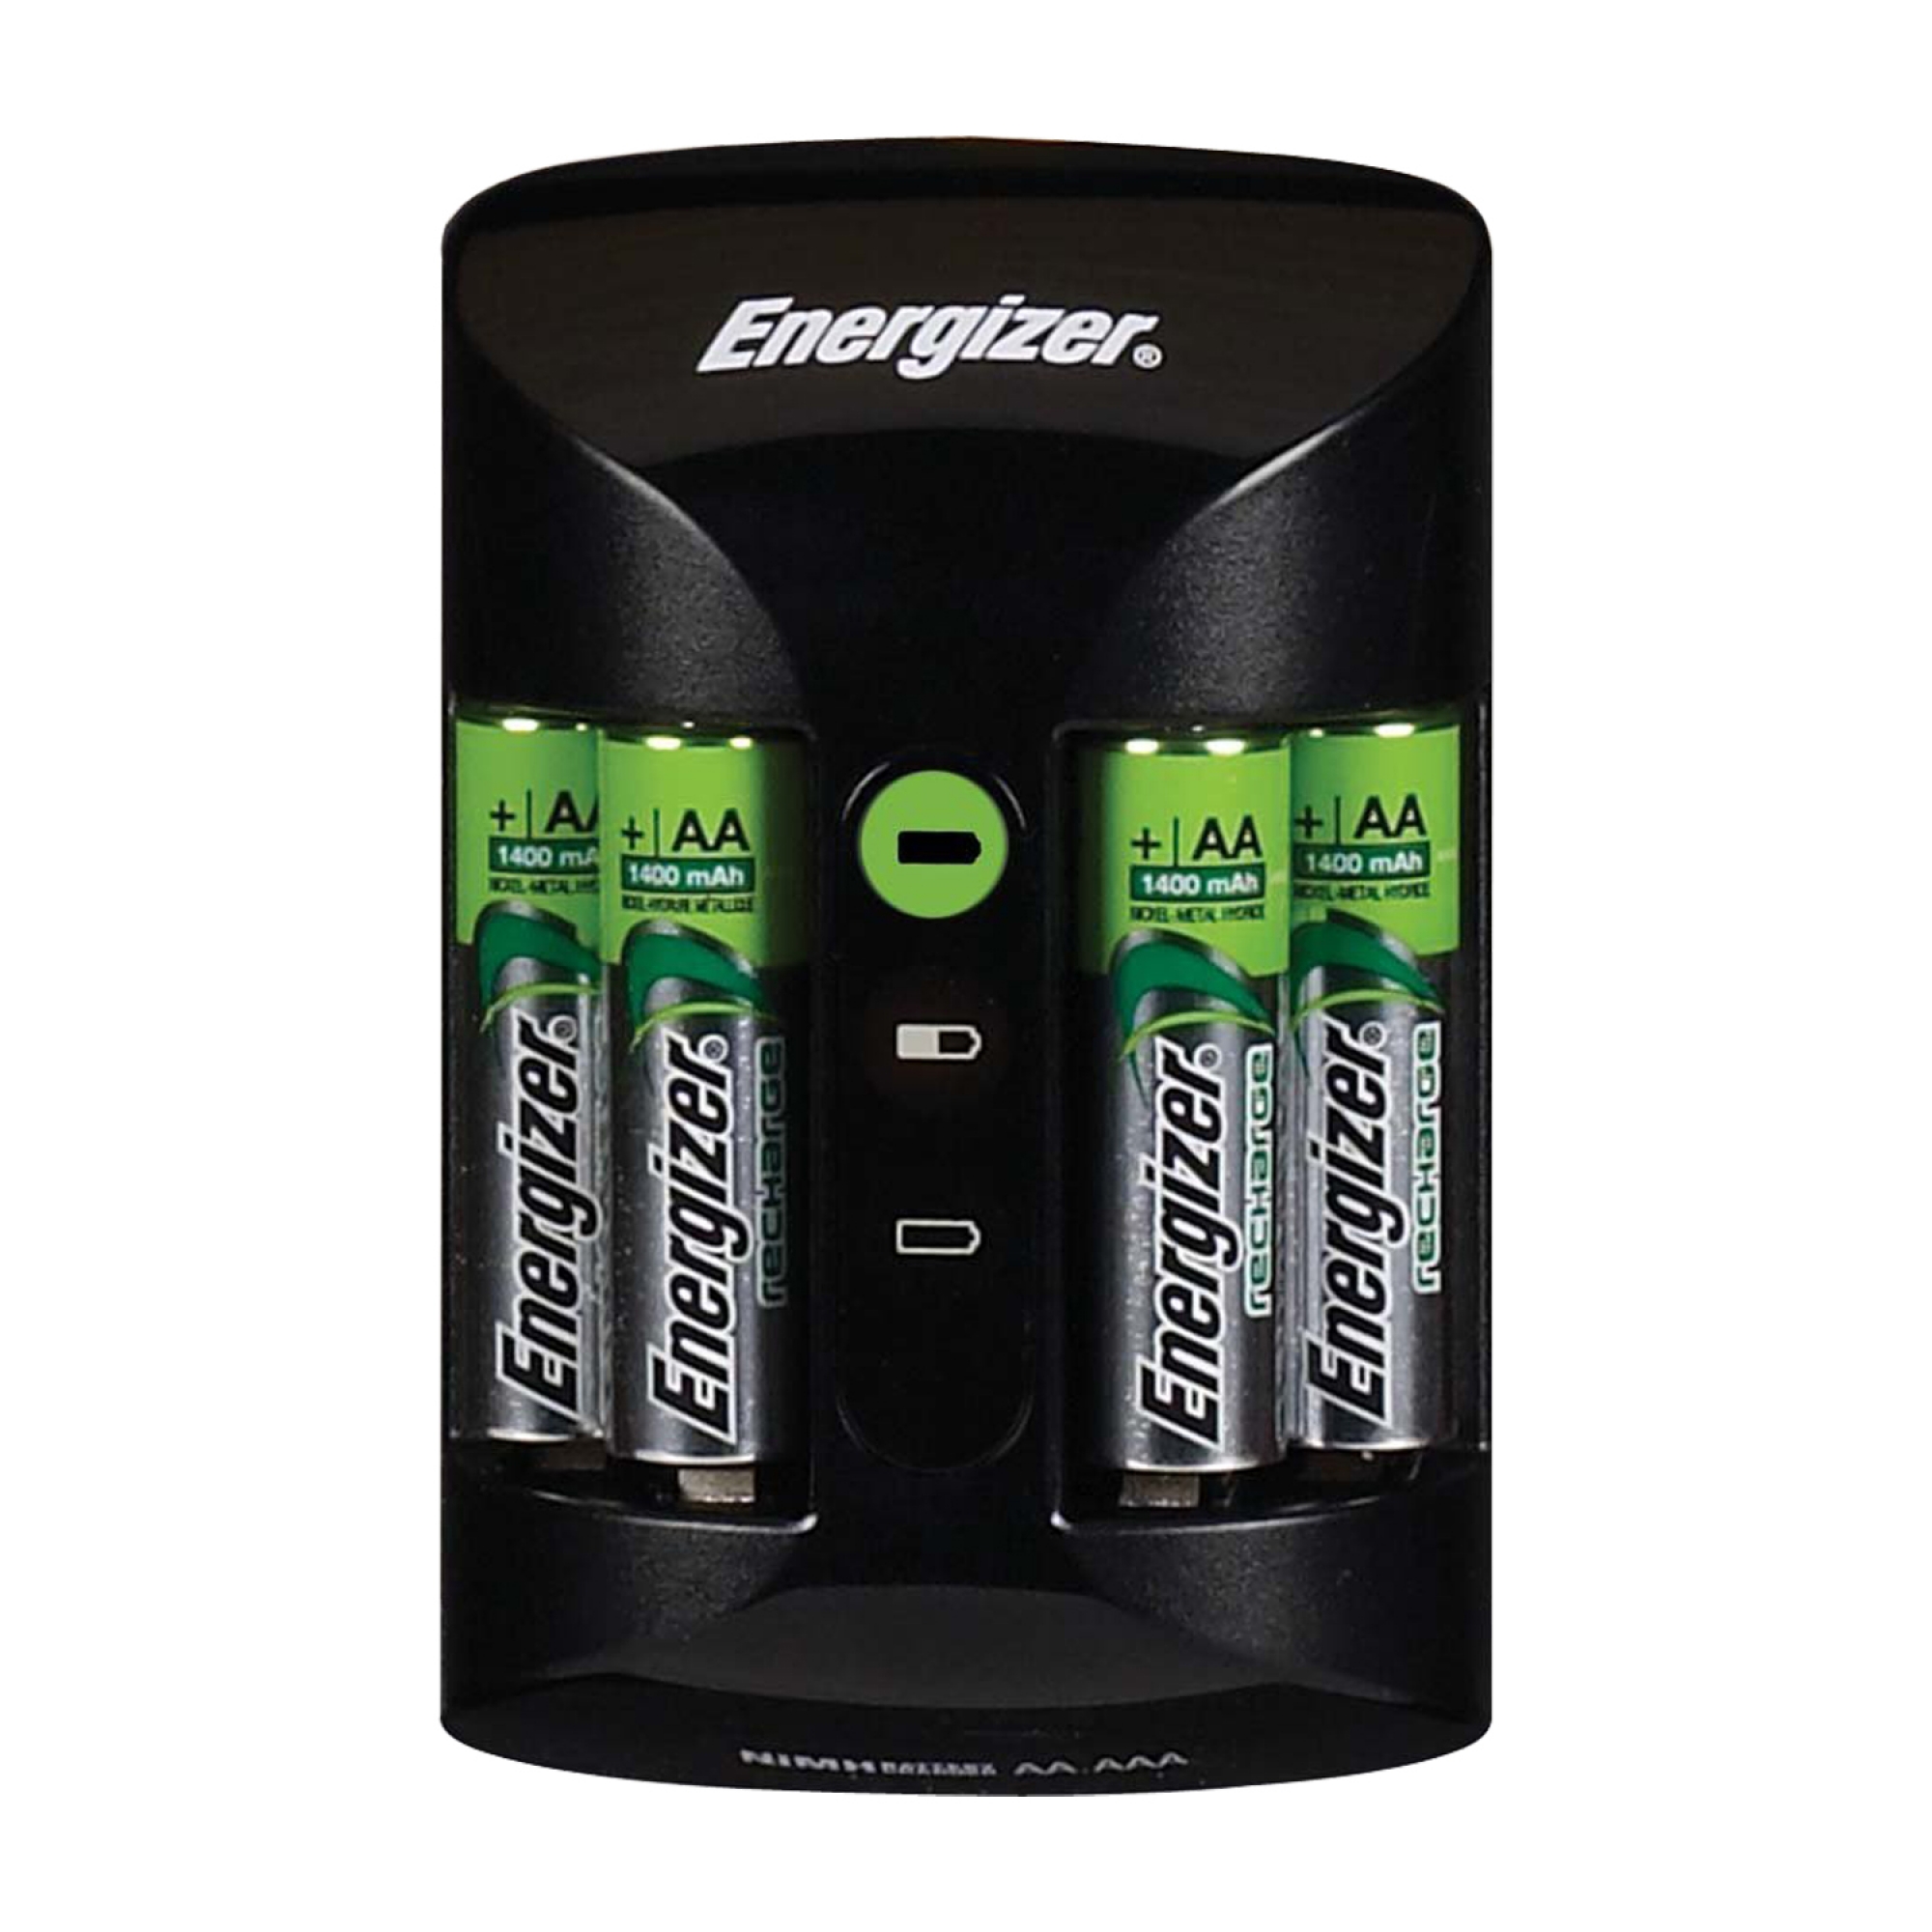 ENERGIZER CHARGER W/4 AA BATTERIES